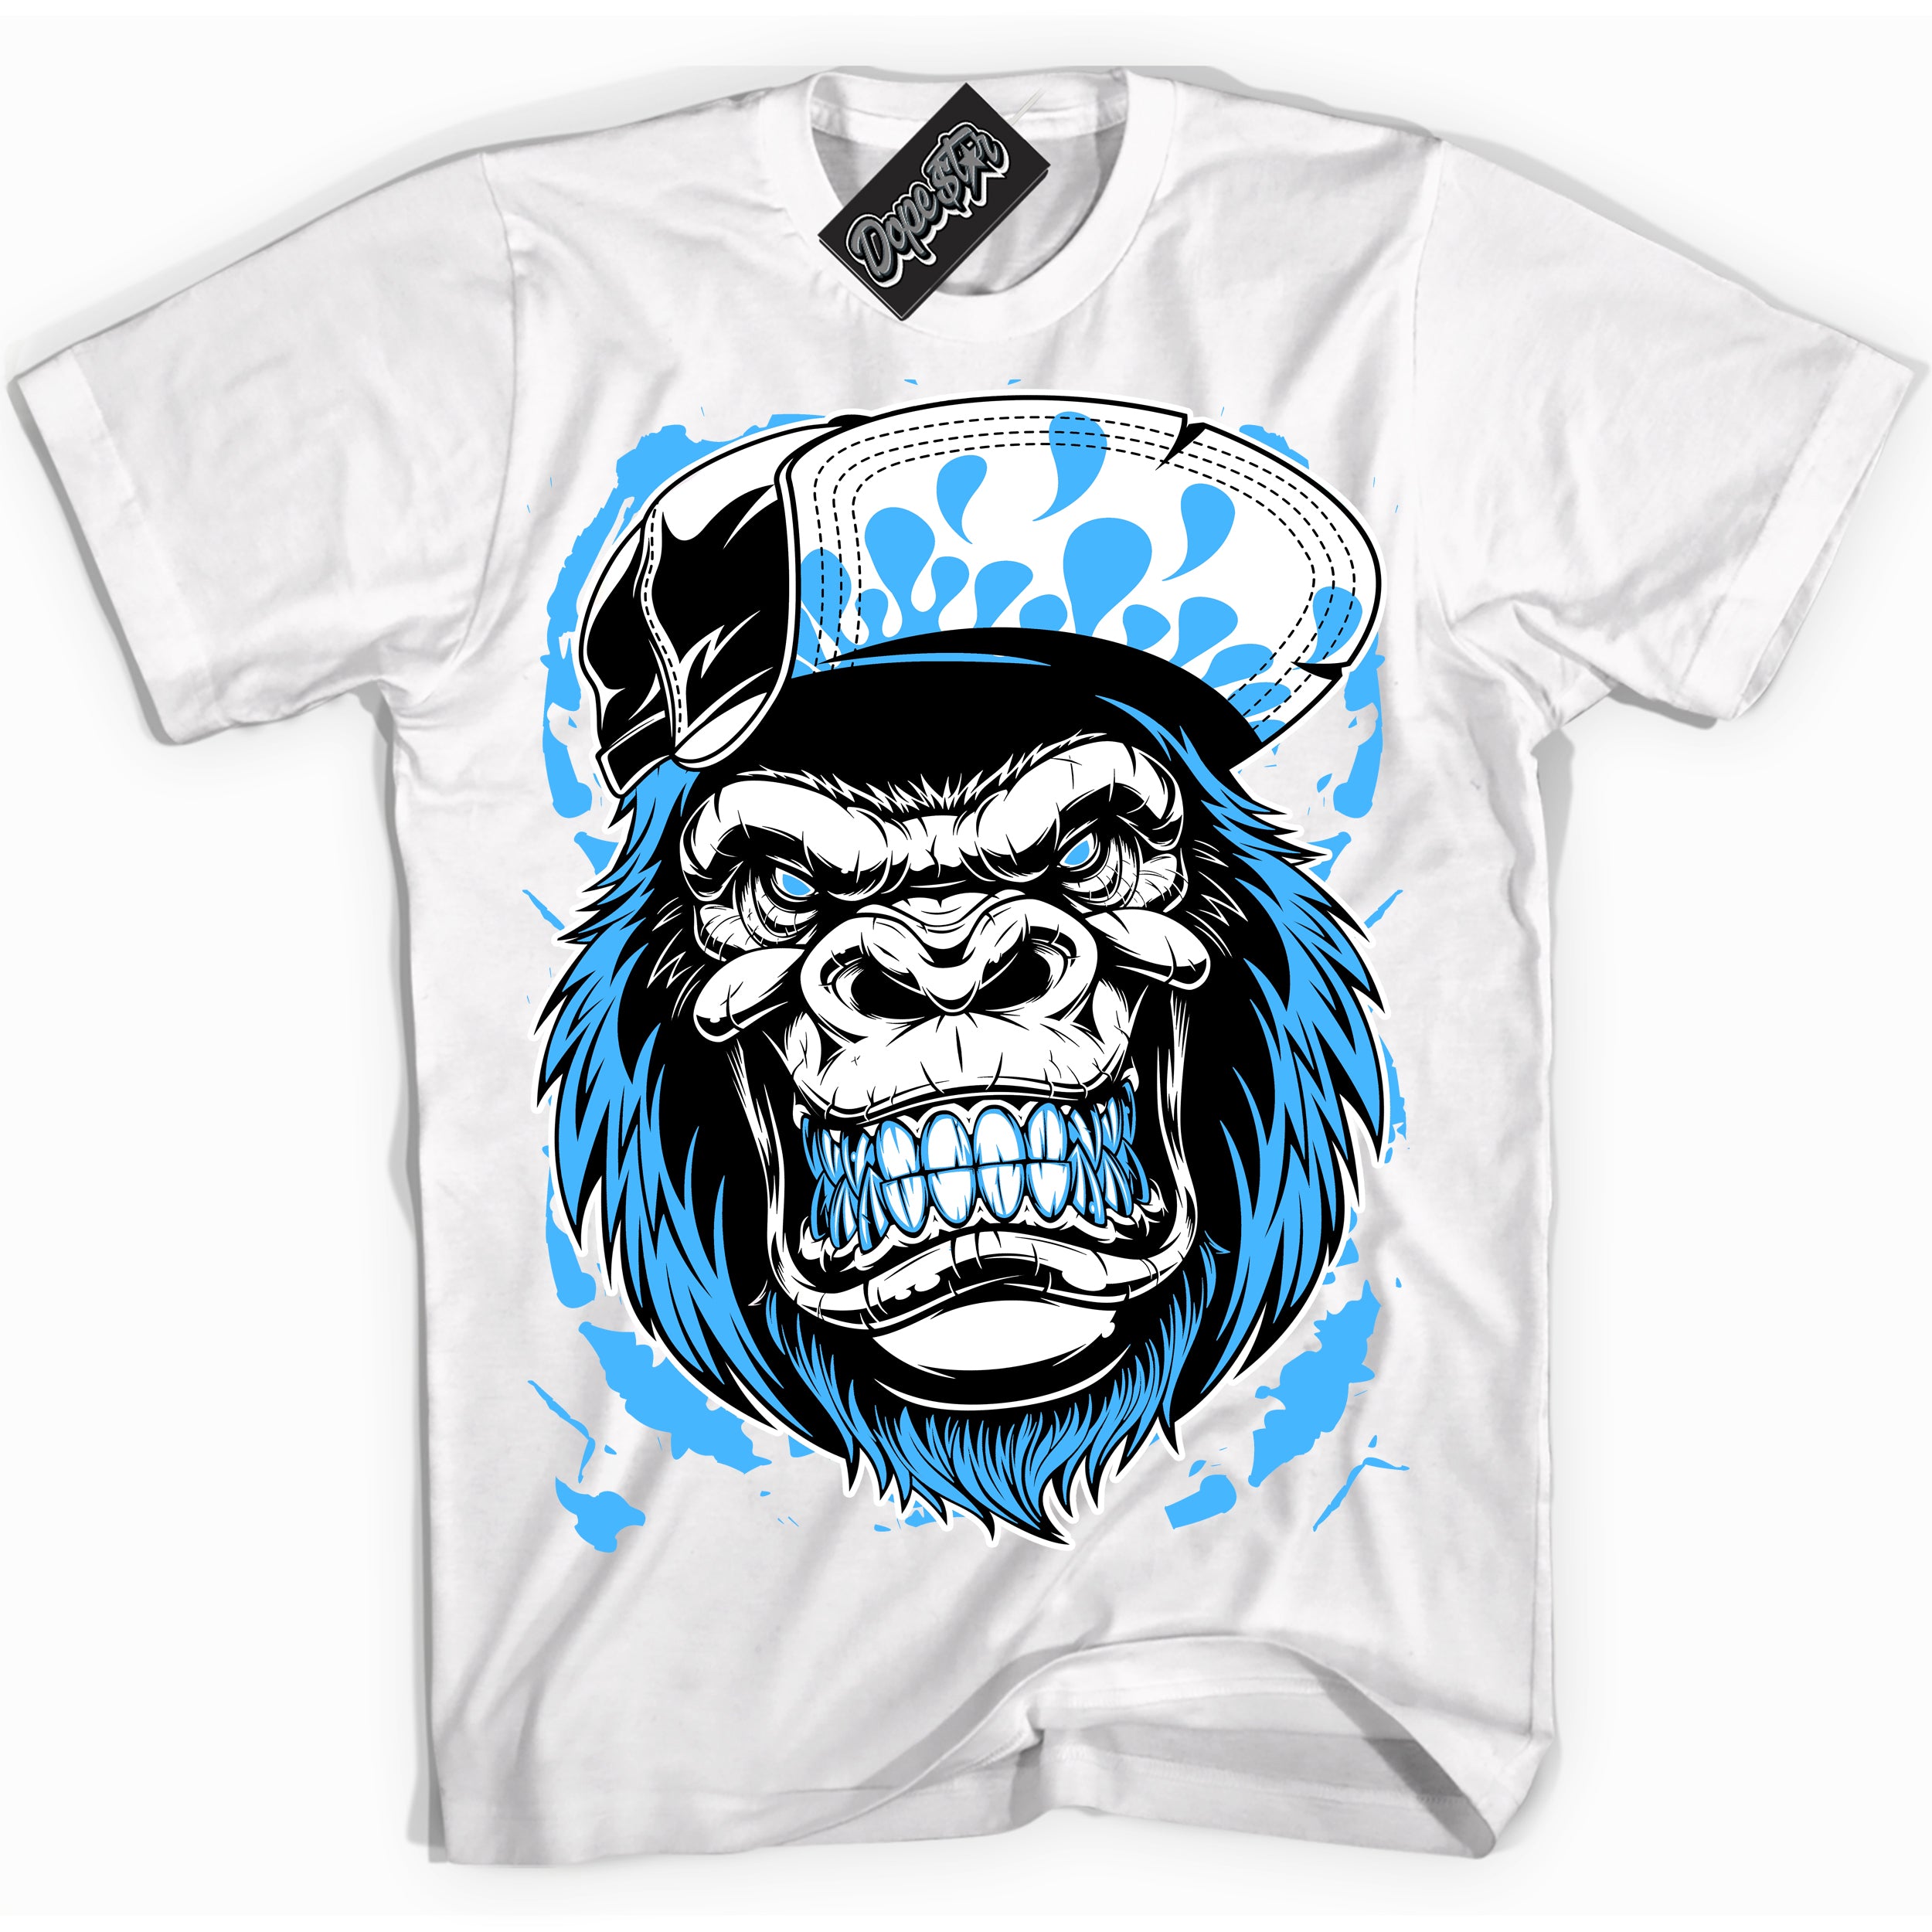 Cool White graphic tee with “ Gorilla Beast ” design, that perfectly matches Powder Blue 9s sneakers 